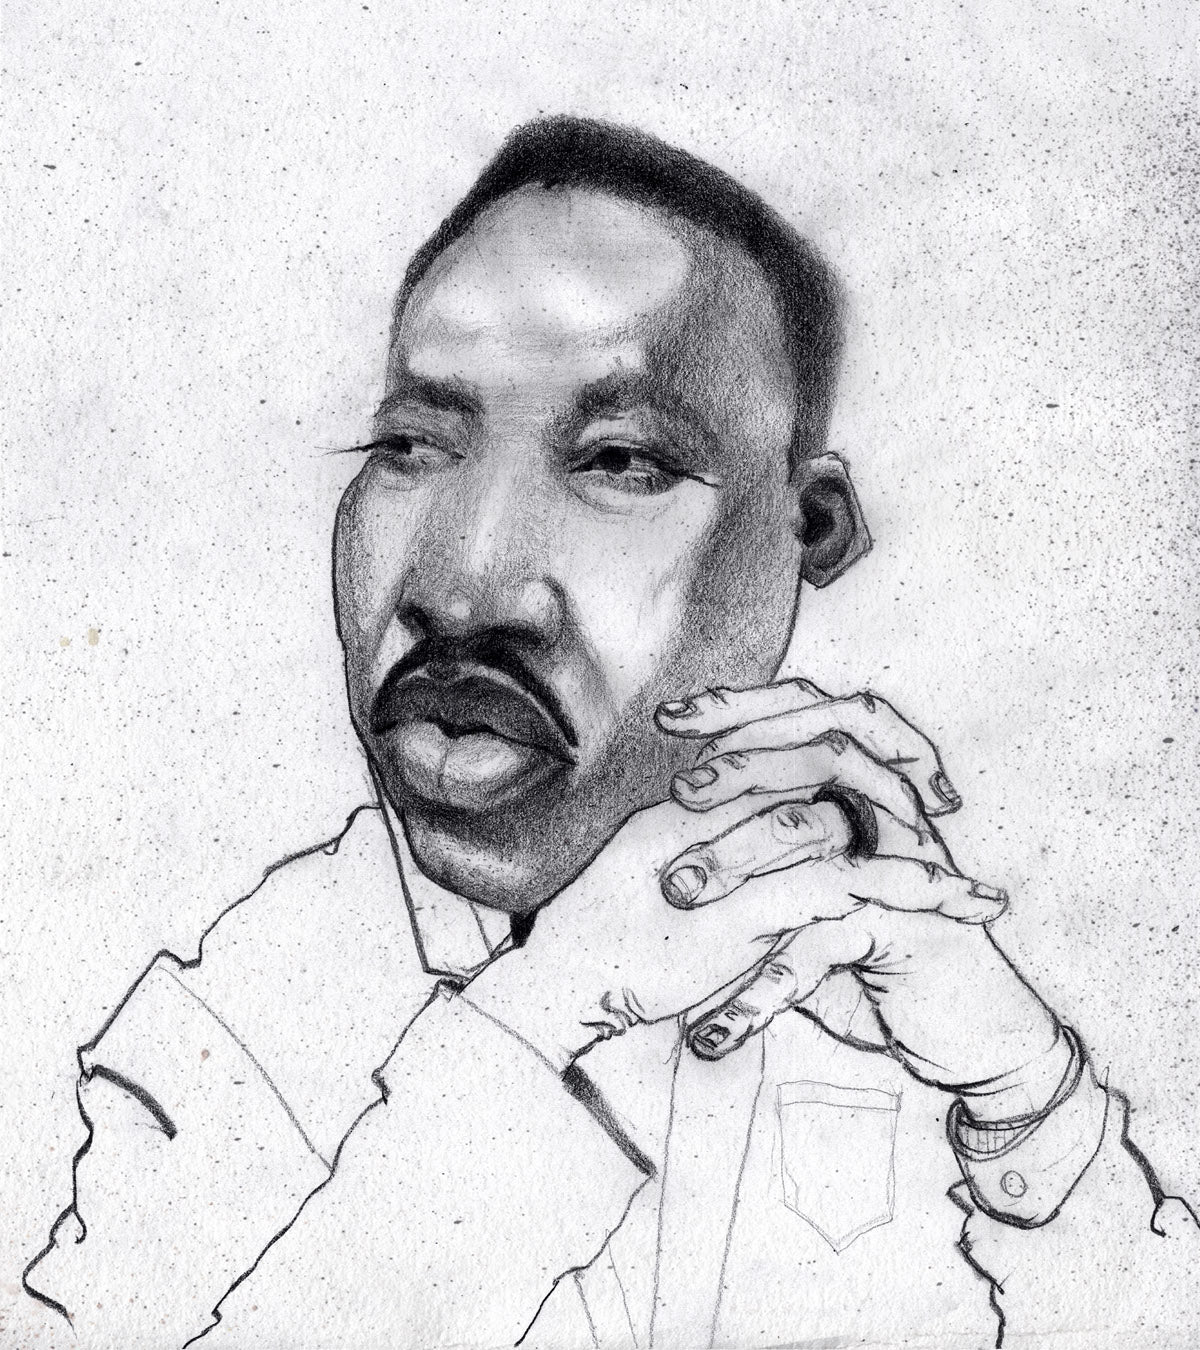 Martin Luther King Jr. wall art Print by contemporary urban artist Justin BUA